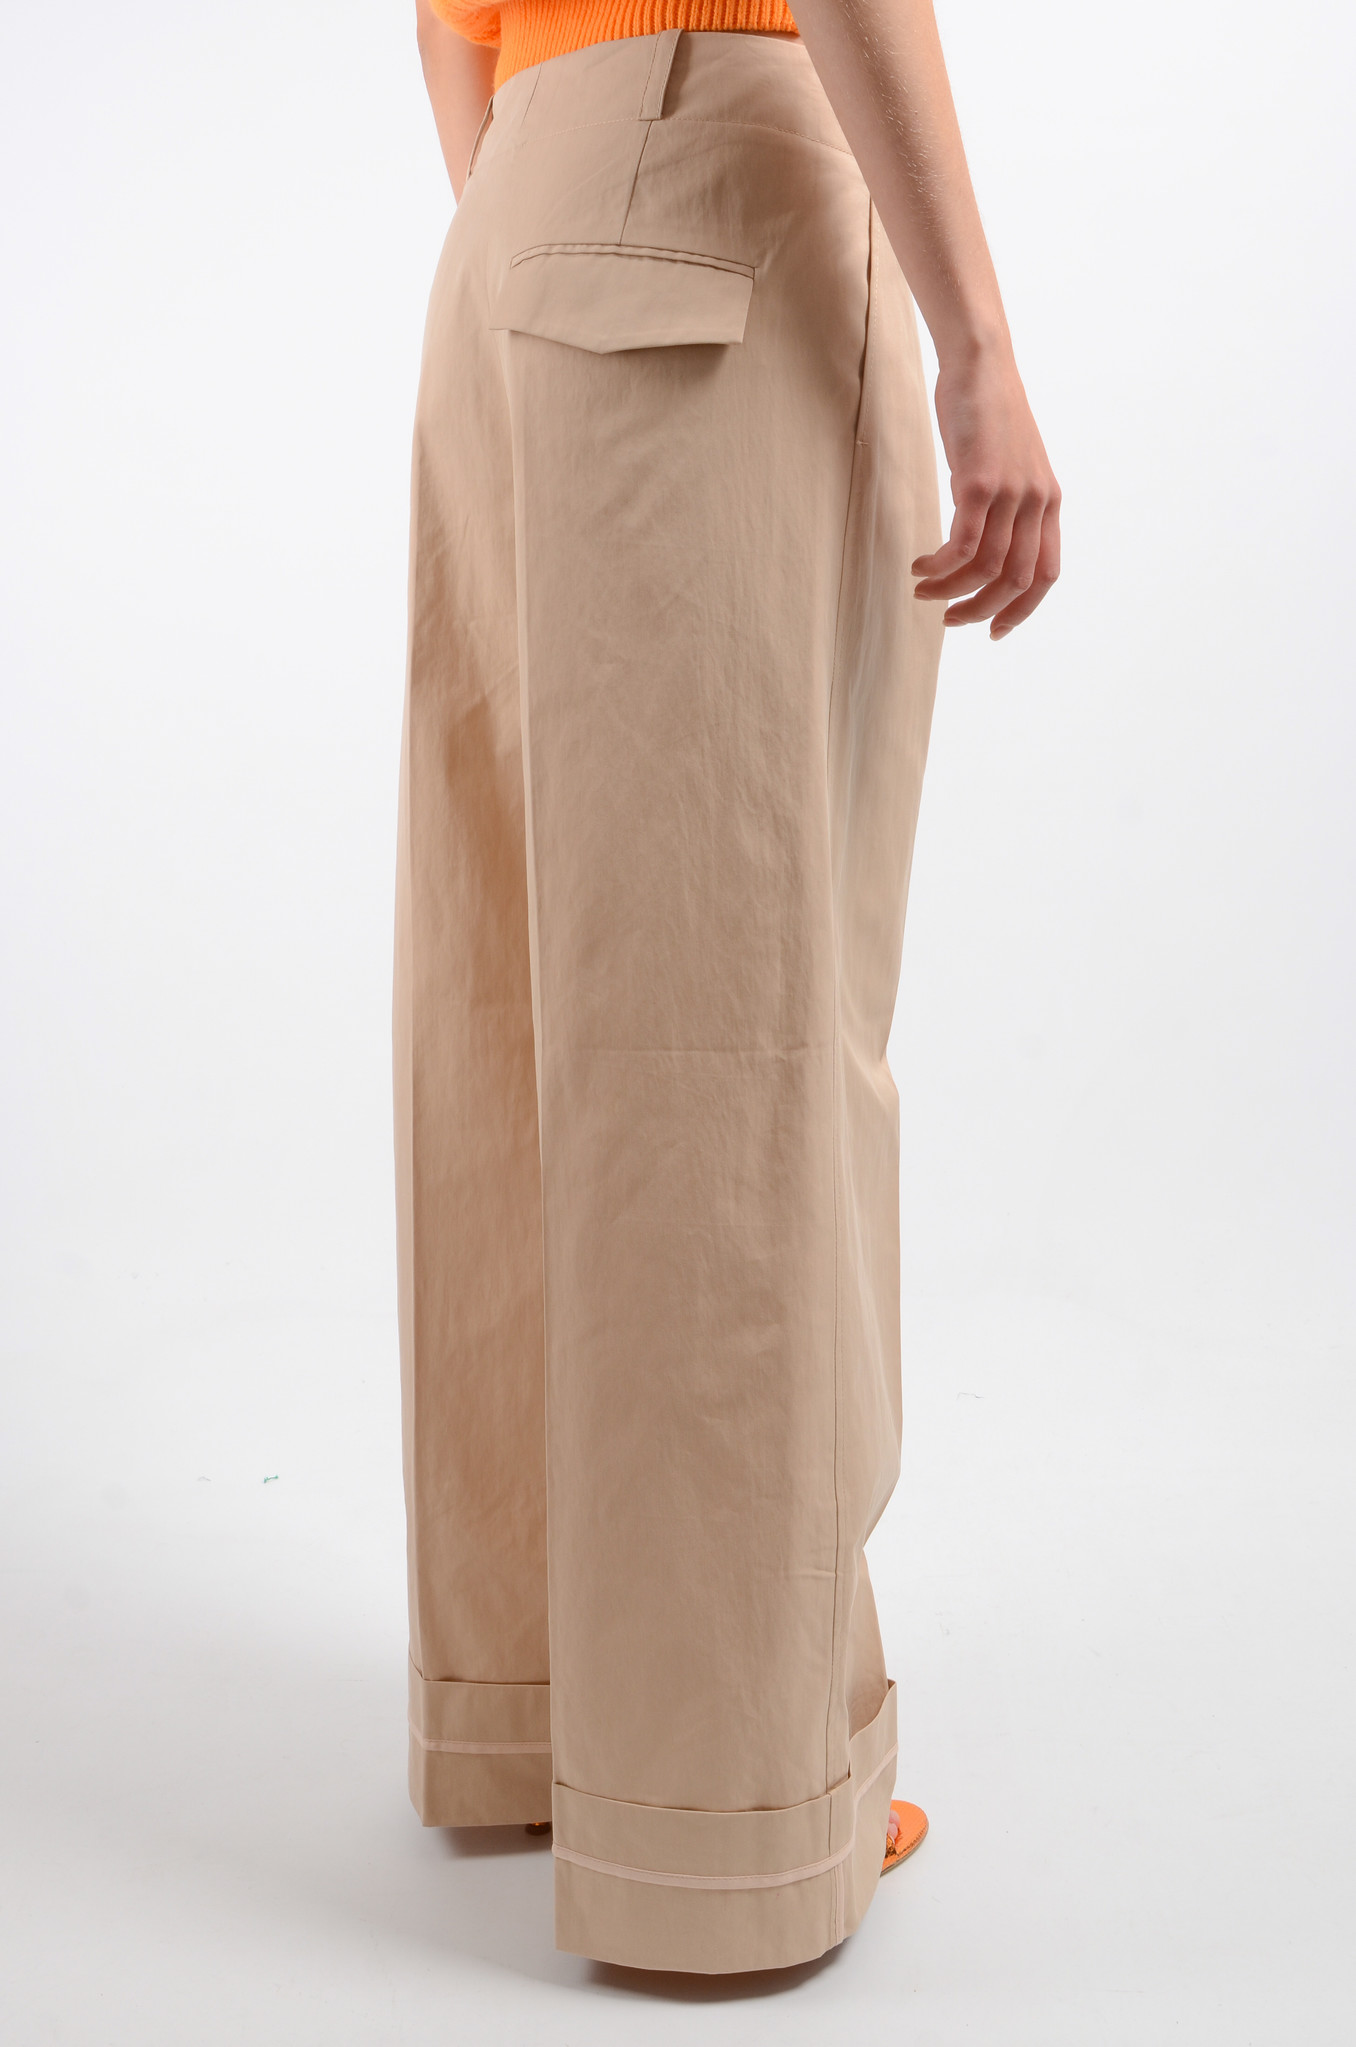 Naddie Trousers in Drizzle-4